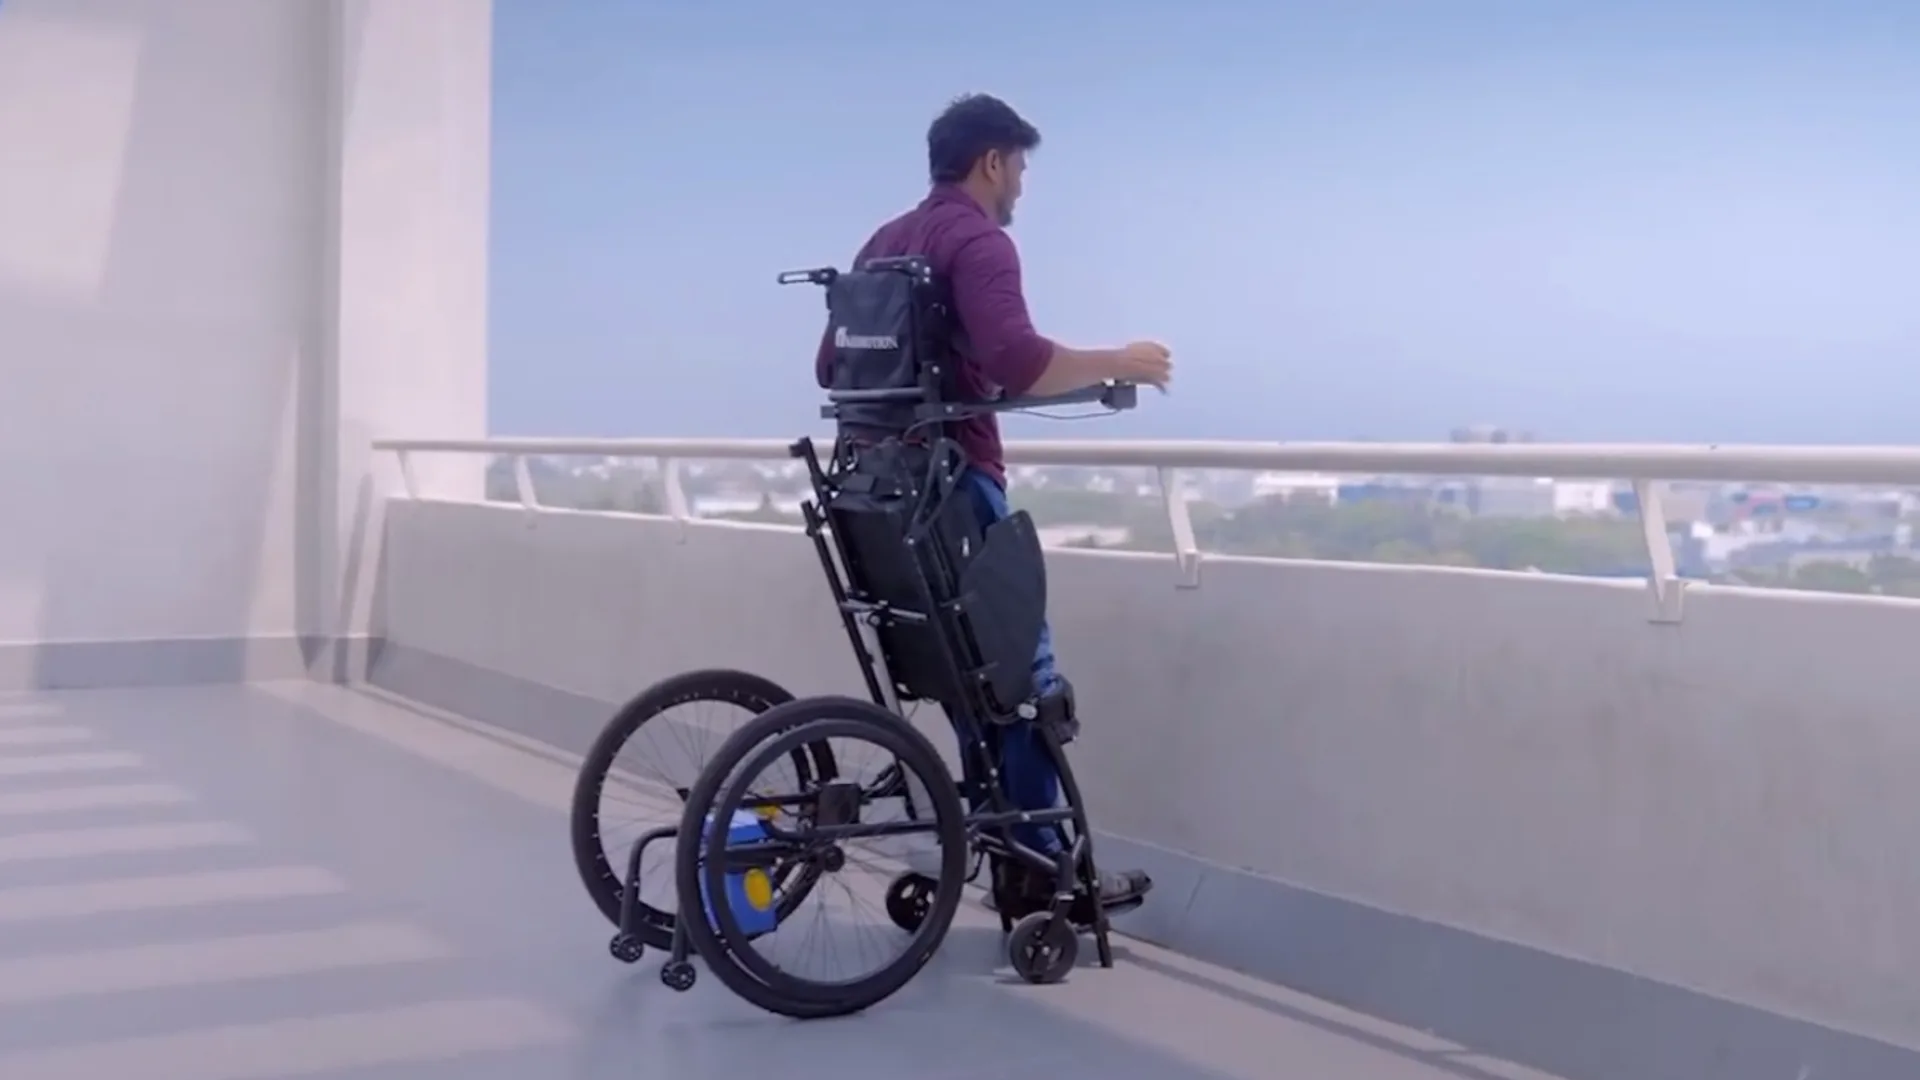 IIT Madras Launches NeoStand, an Electric Standing Wheelchair. (Source: IIT Madras)